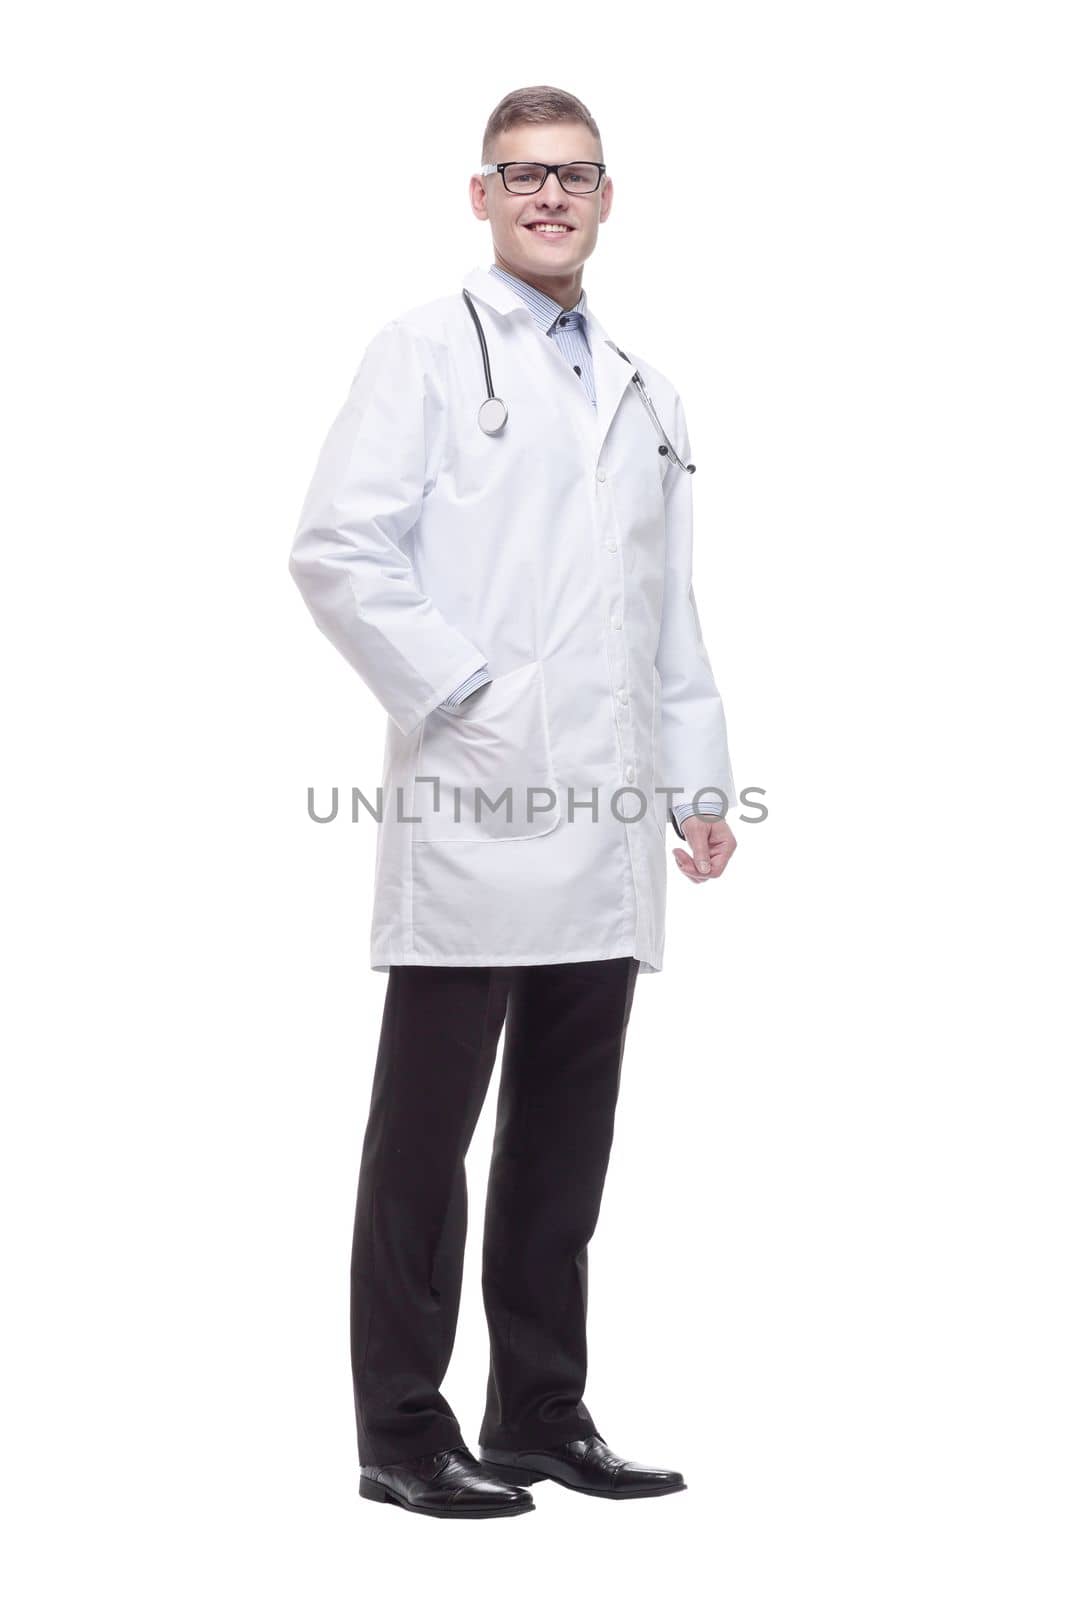 in full growth. confident young doctor with a stethoscope. isolated on a white background.